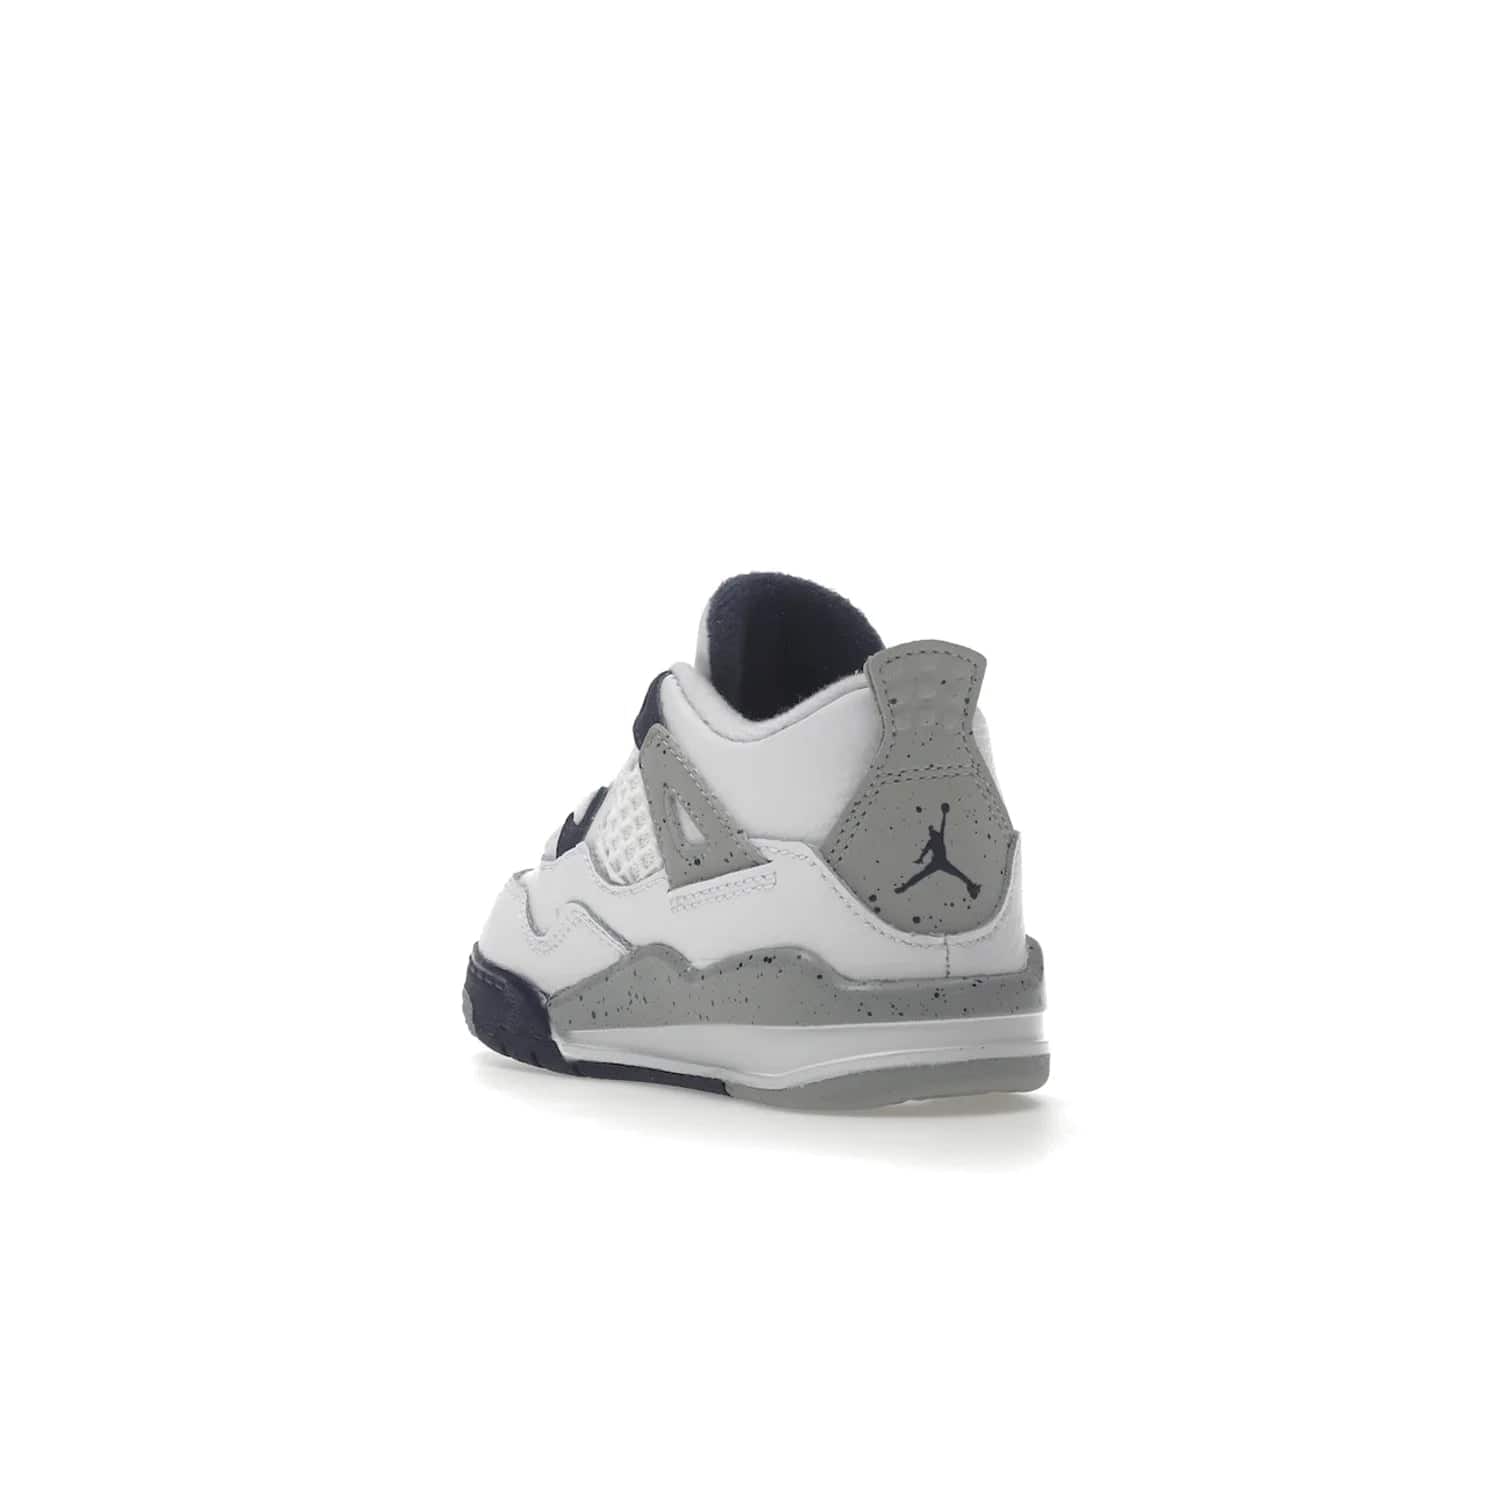 Jordan 4 Retro Midnight Navy (TD) - Image 25 - Only at www.BallersClubKickz.com - Introducing the Jordan 4 Retro Midnight Navy (TD) for kids. White leather upper with navy and grey accents plus fire red detailing. Perfect for everyday wear. Get yours before they sell out.